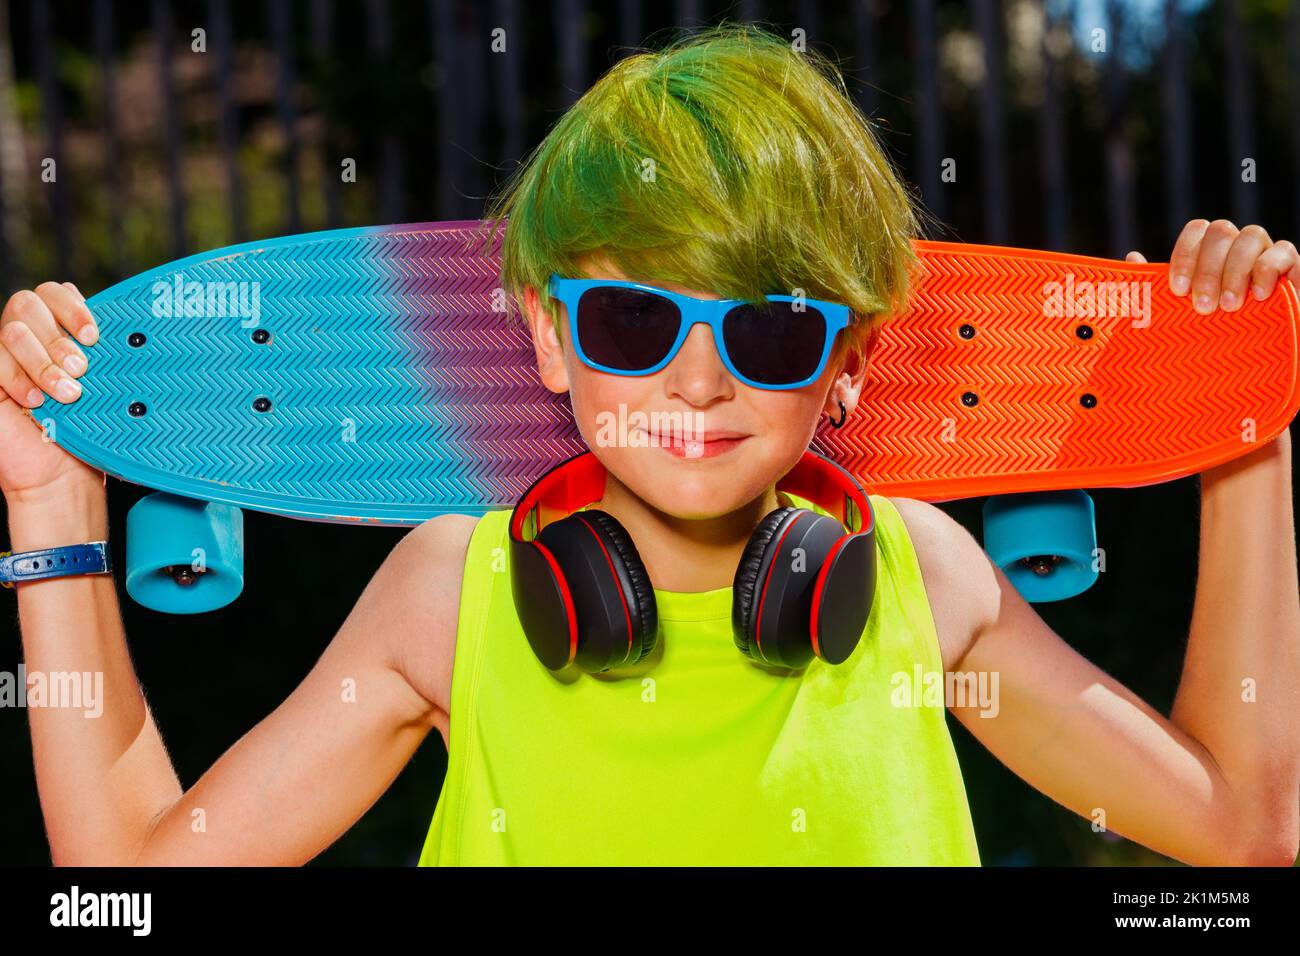 Close-up portrait of a boy with skateboard green hair headphones Stock Photo